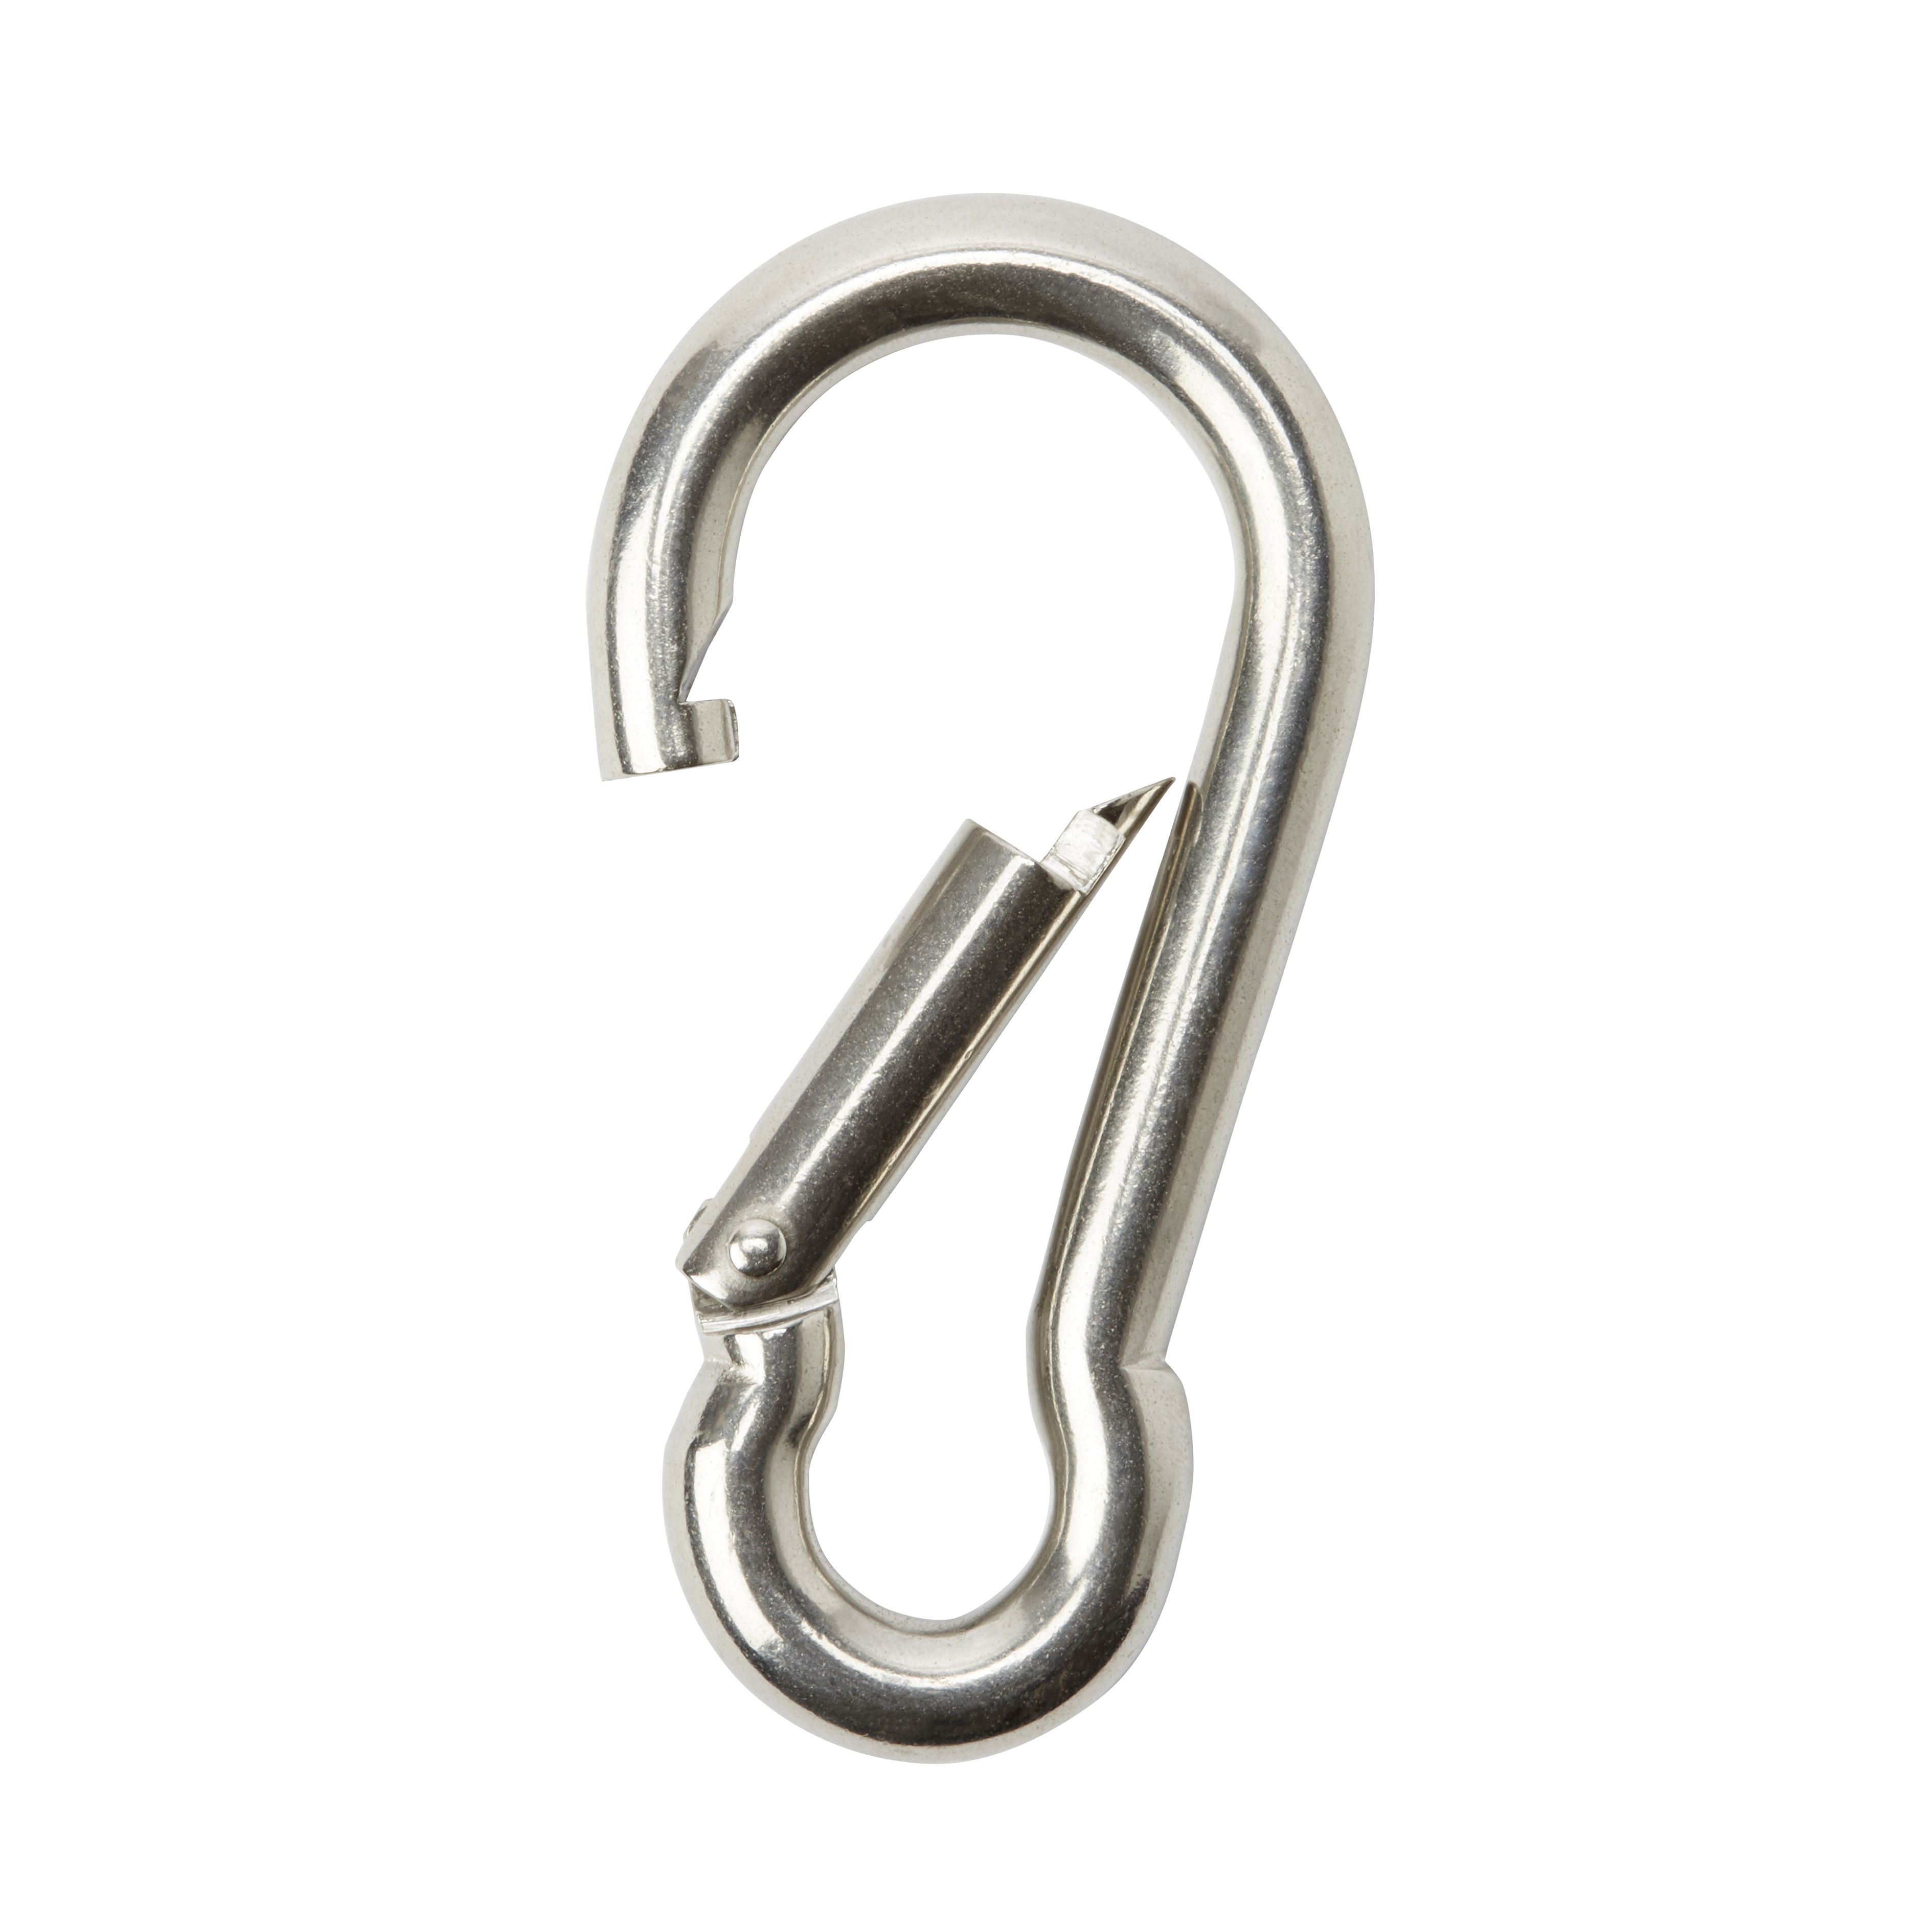 https://media.diy.com/is/image/Kingfisher/diall-chrome-plated-stainless-steel-spring-snap-hook-l-50mm~3663602920663_03bq?$MOB_PREV$&$width=618&$height=618